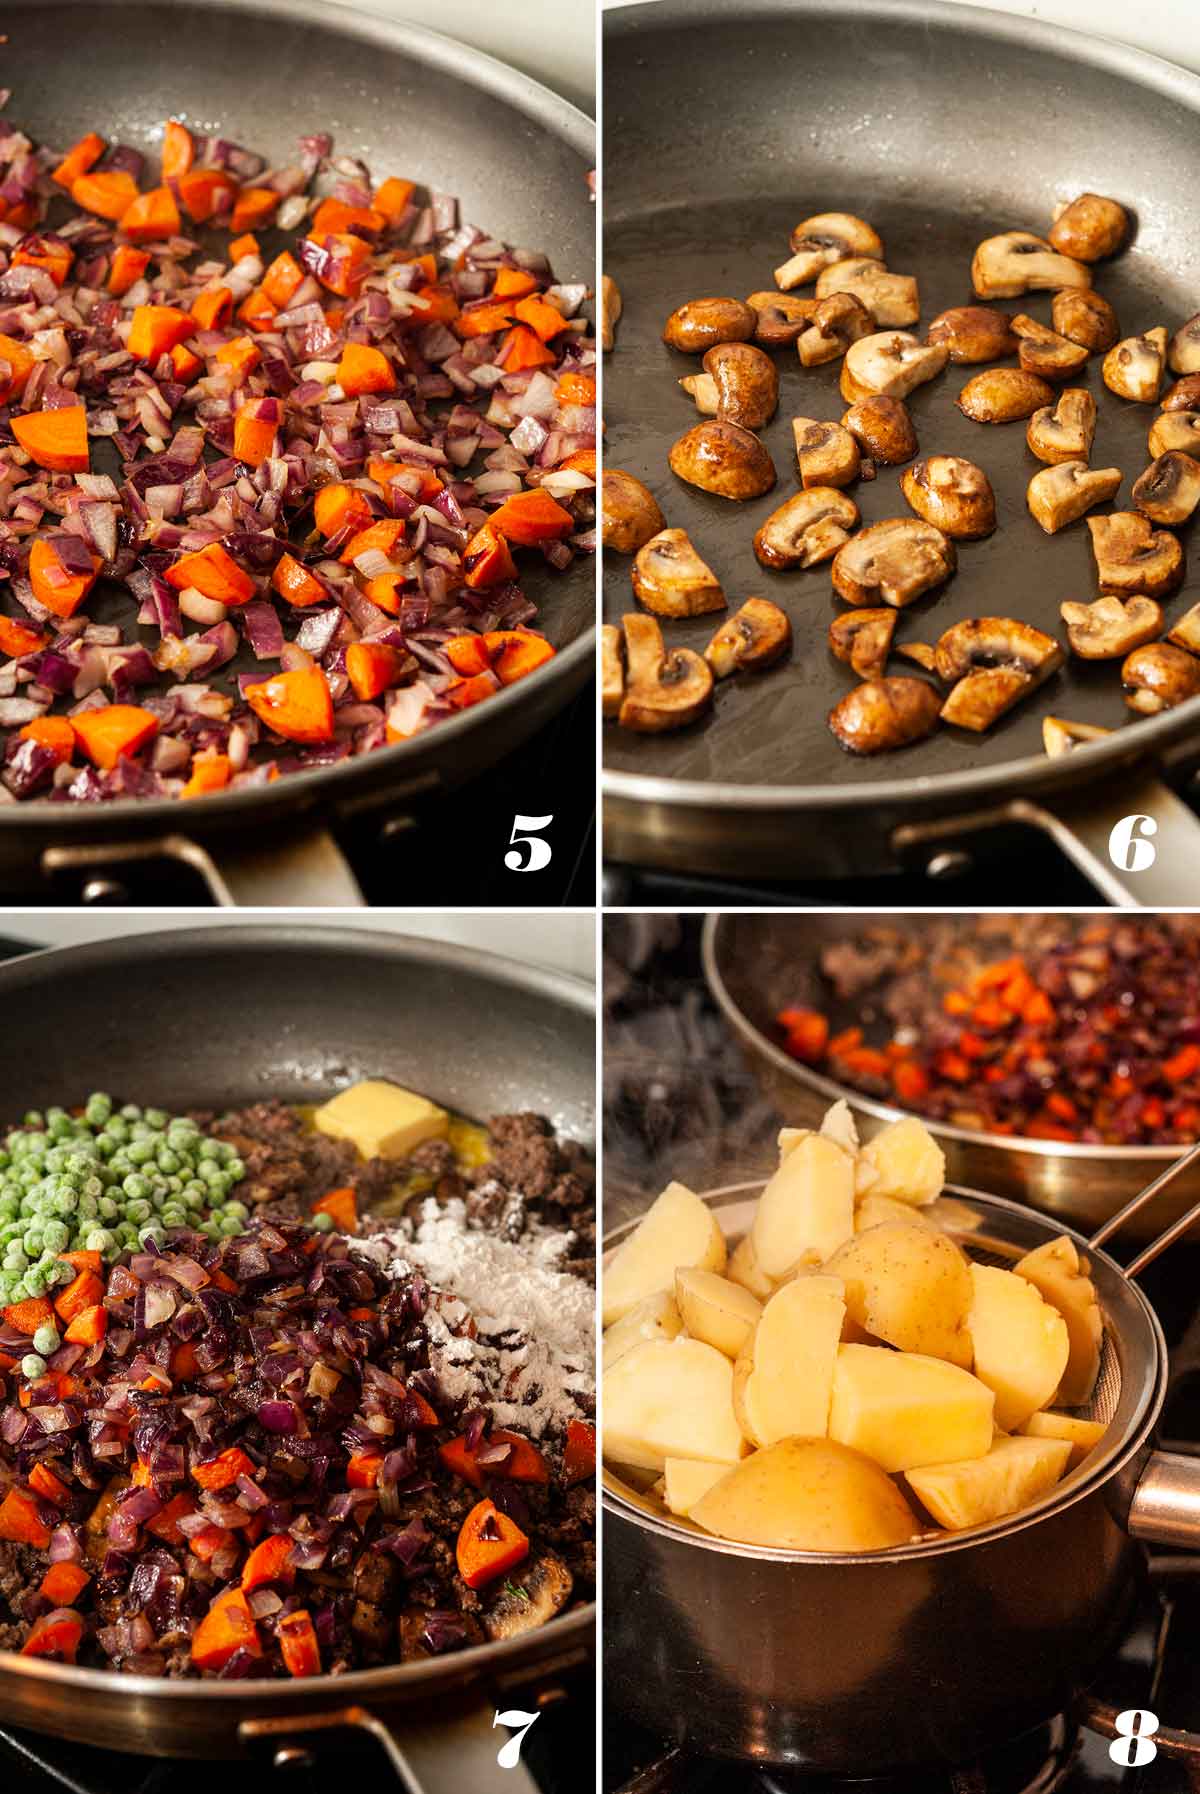 A collage of 4 numbered images showing how to make shepherd's pie.